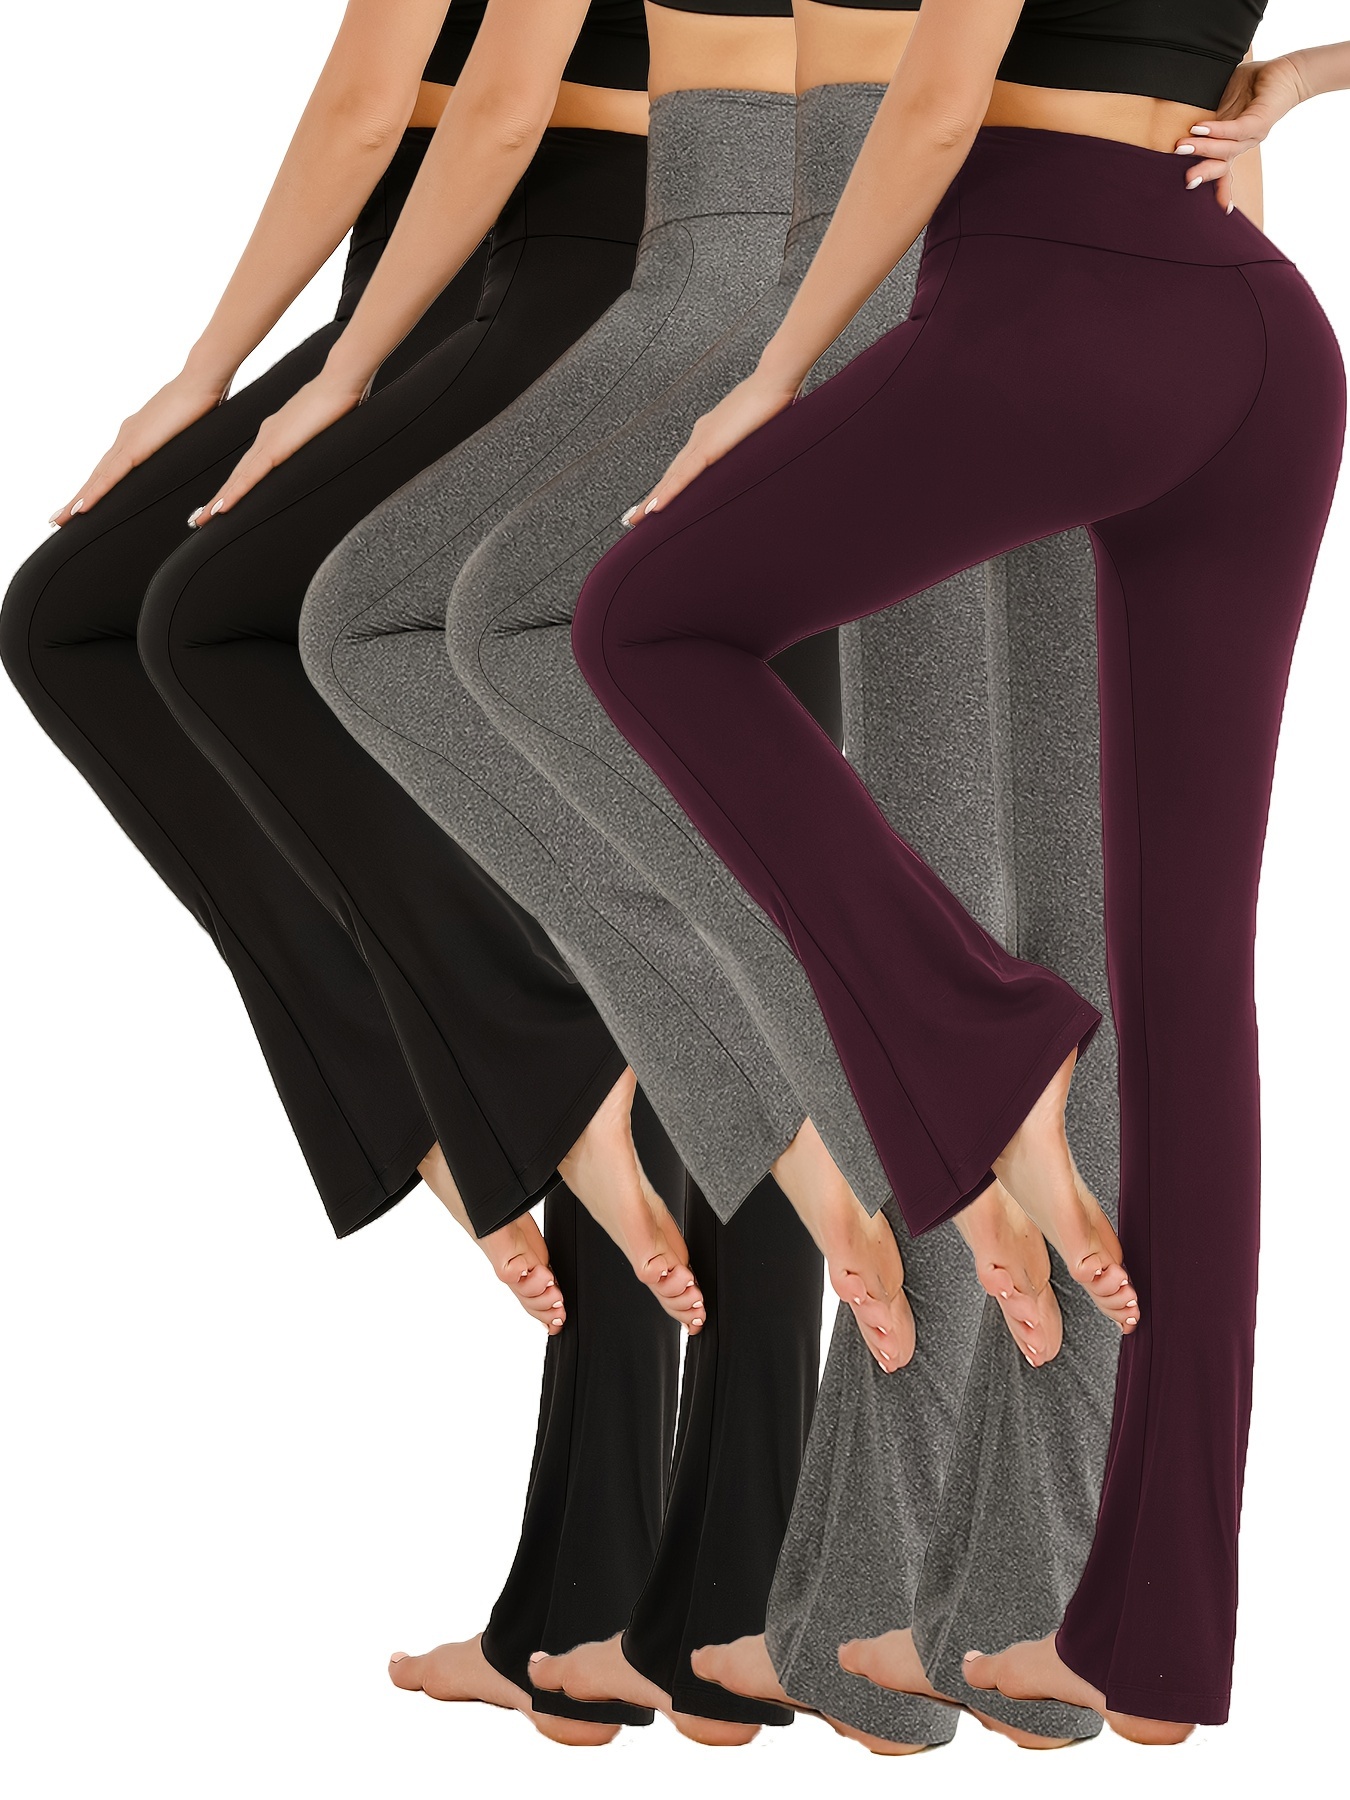 Women's Flare Pants High Waisted Workout Leggings Stretchy Non-See Through  Tummy Control Bootcut Yoga Pants Women's Ninth Pants Flared Pants High